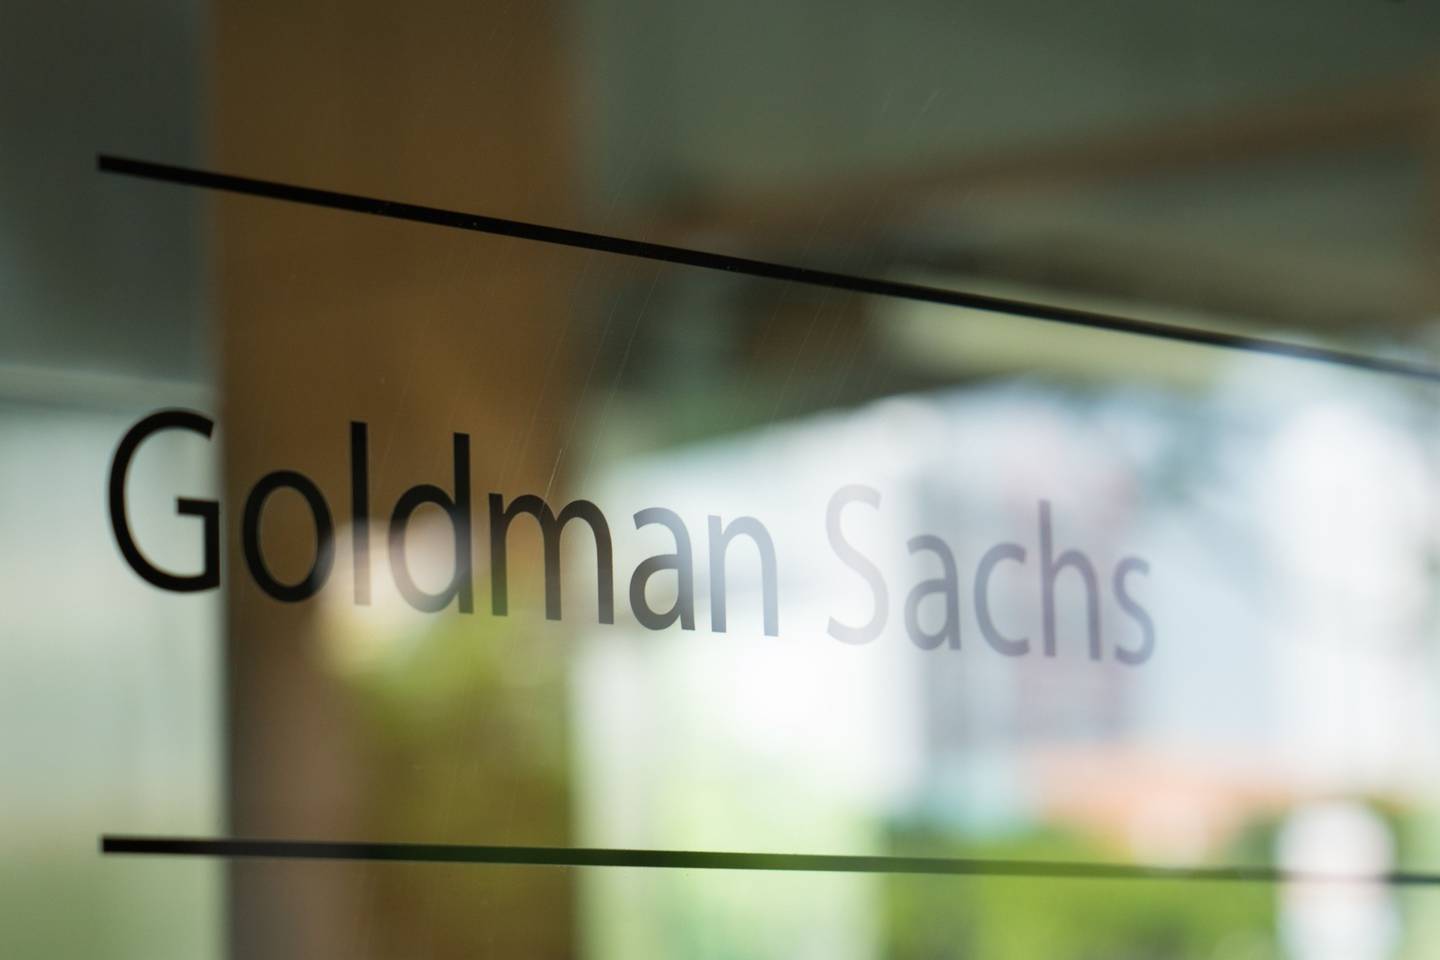 Alberto Ramos, head of the Latin America macroeconomic research team of the US investment bank Goldman Sachs, talks about Argentina's latest bid to manage its economic turmoil.